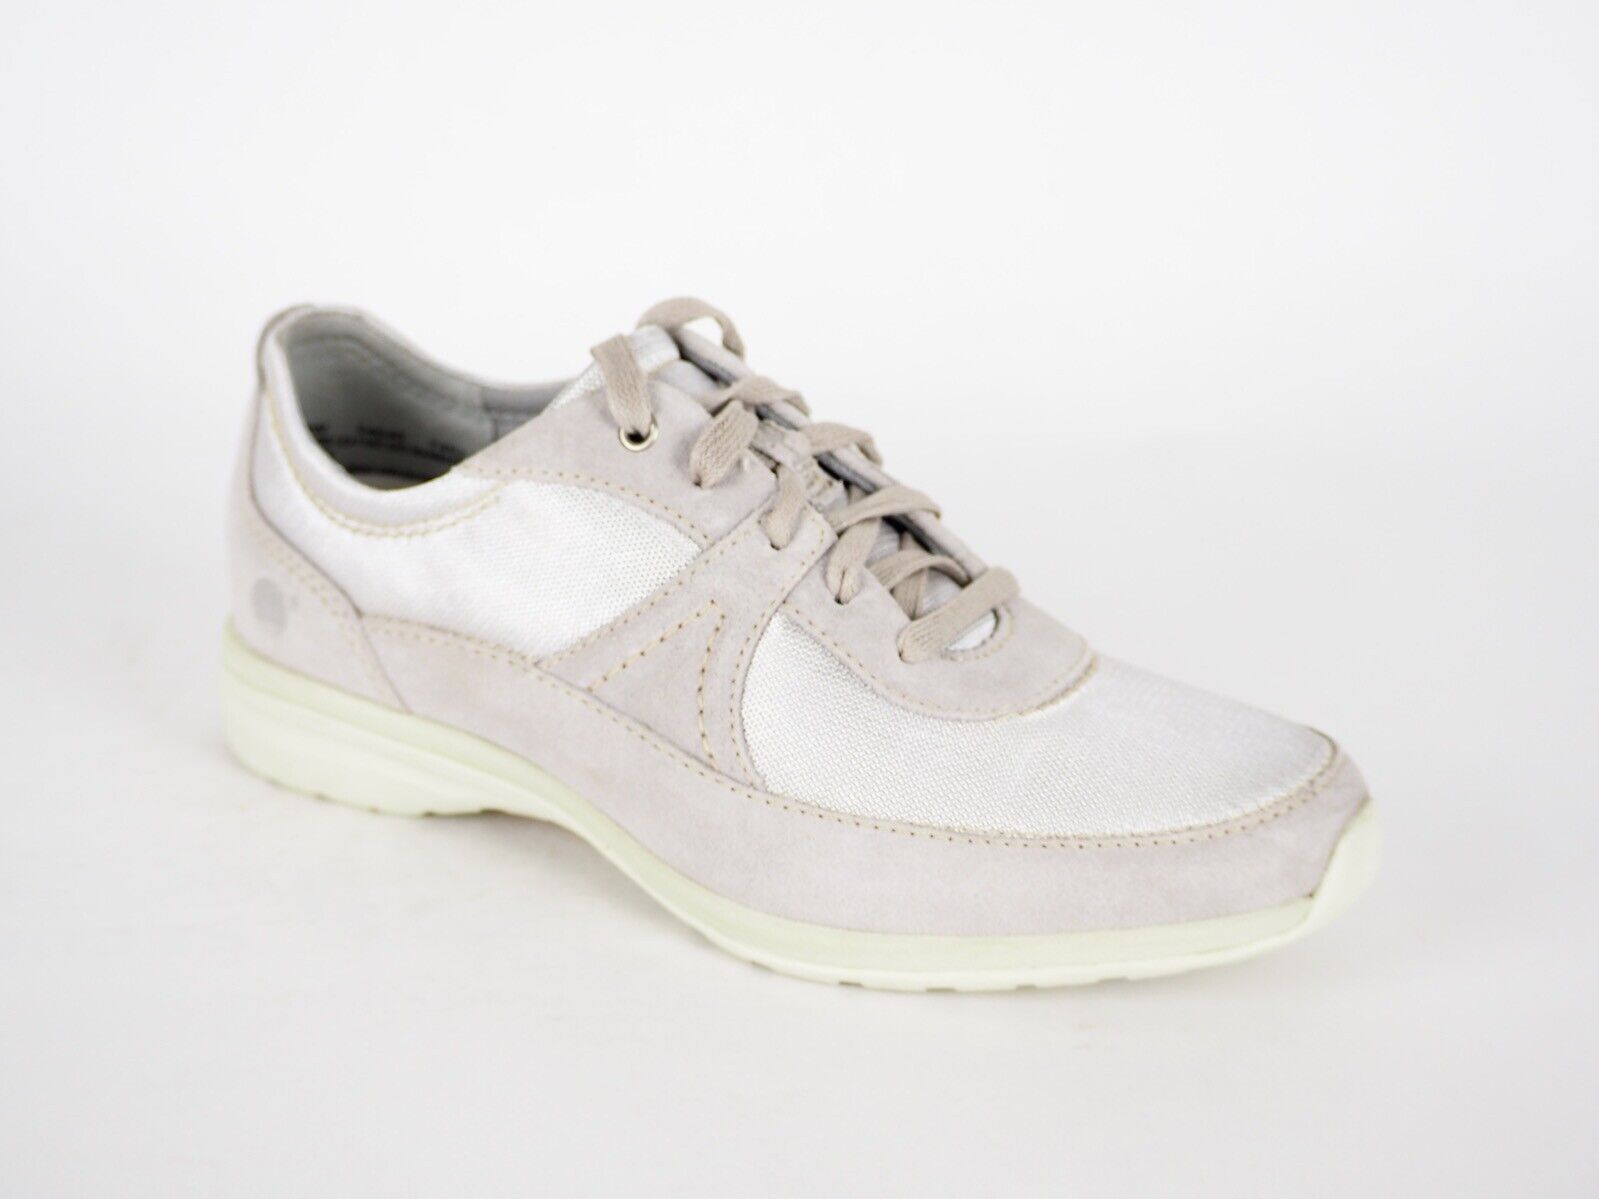 Womens Timberland Killington Park 14640 Lt Grey Leather Fabric Lace Up Trainers - London Top Style